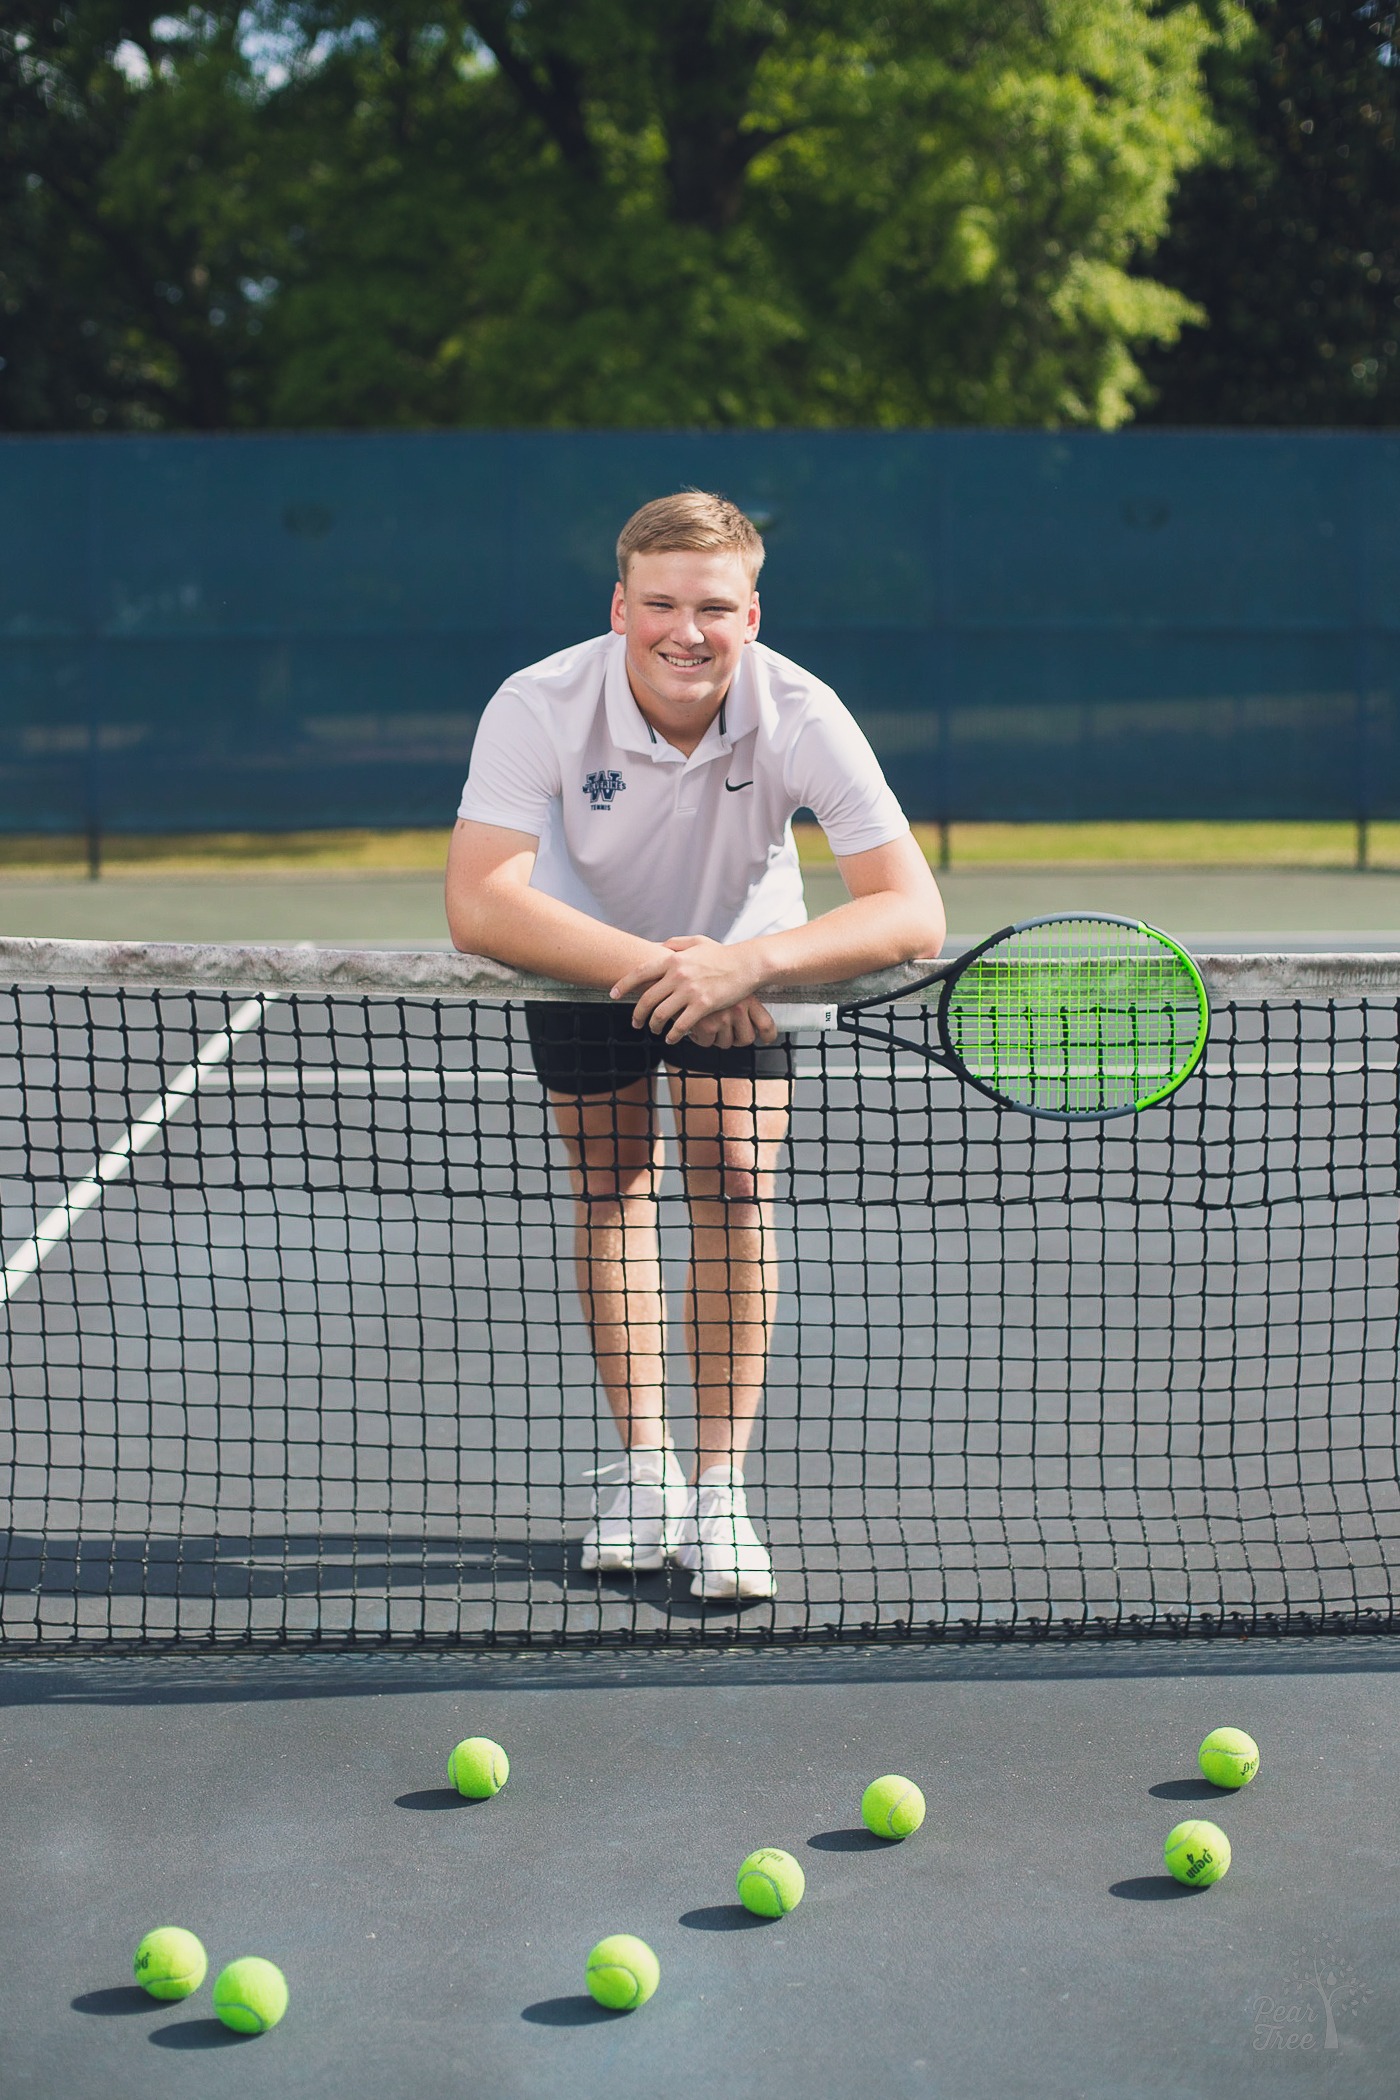 Smiling Woodstock High School Varsity Tennis senior leaning over tennis net with racquet in hand and tennis balls on the court in front of him